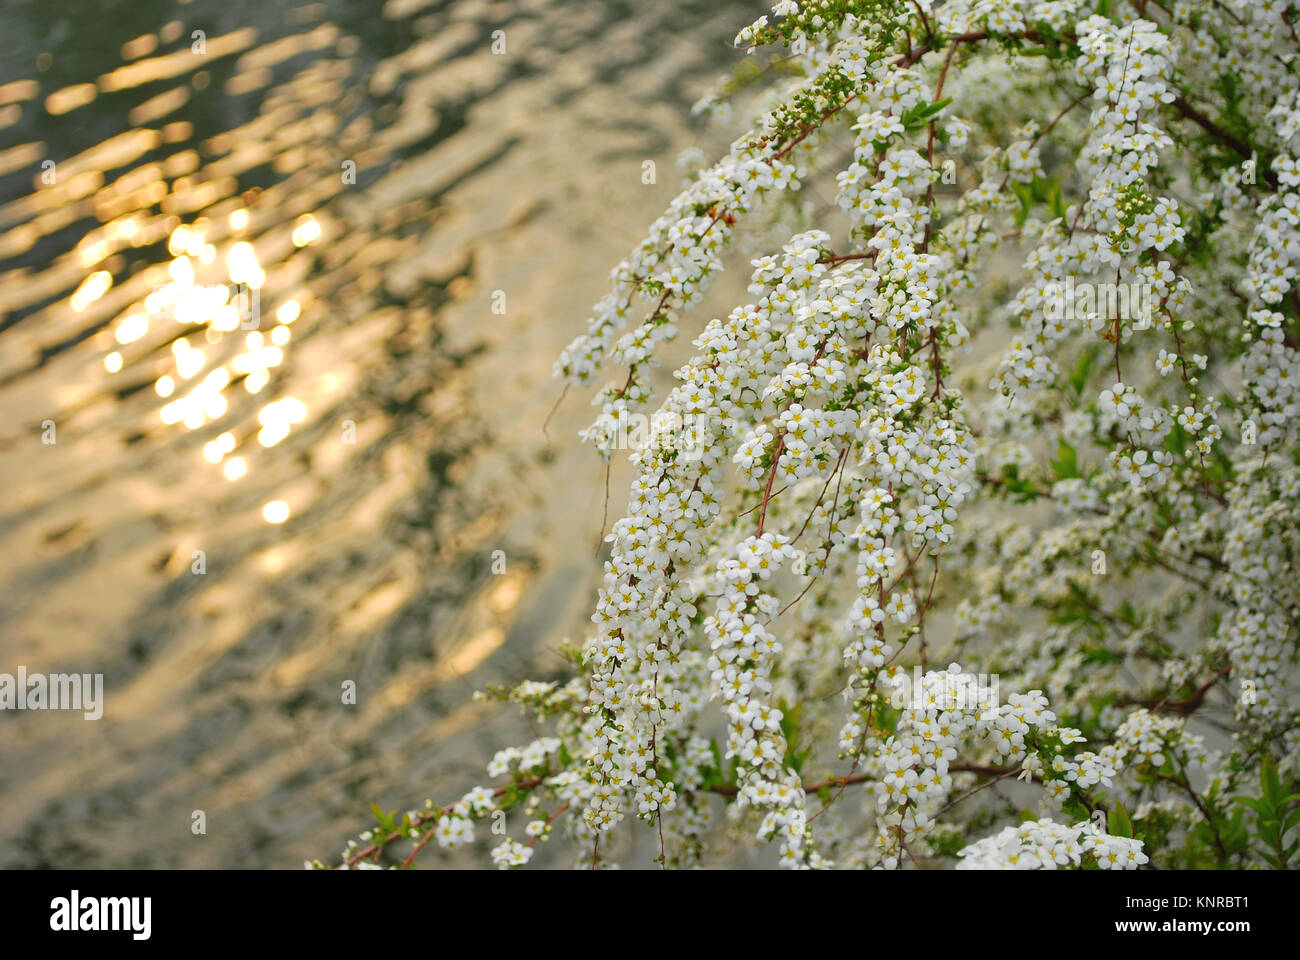 Small, white flowers against sunset background, symbolizing the concept of transiency, the short-lived nature of things, passing of time and other abs Stock Photo